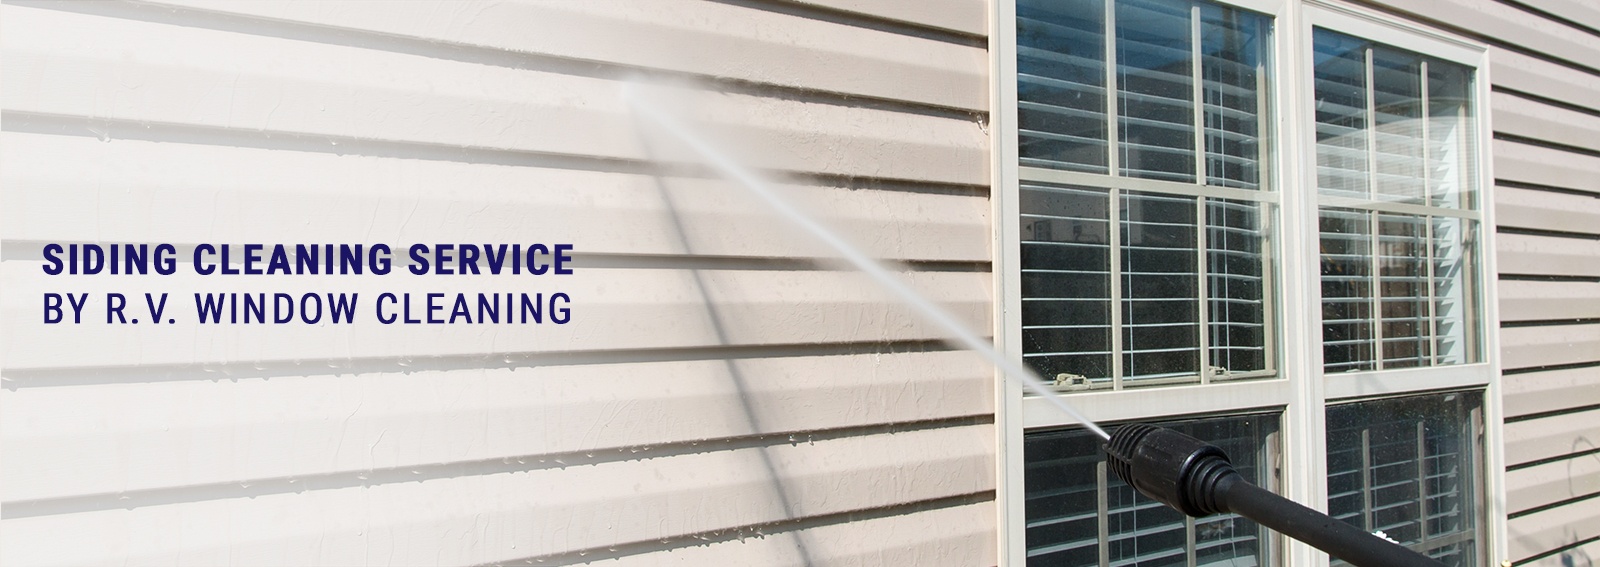 Siding Cleaning London